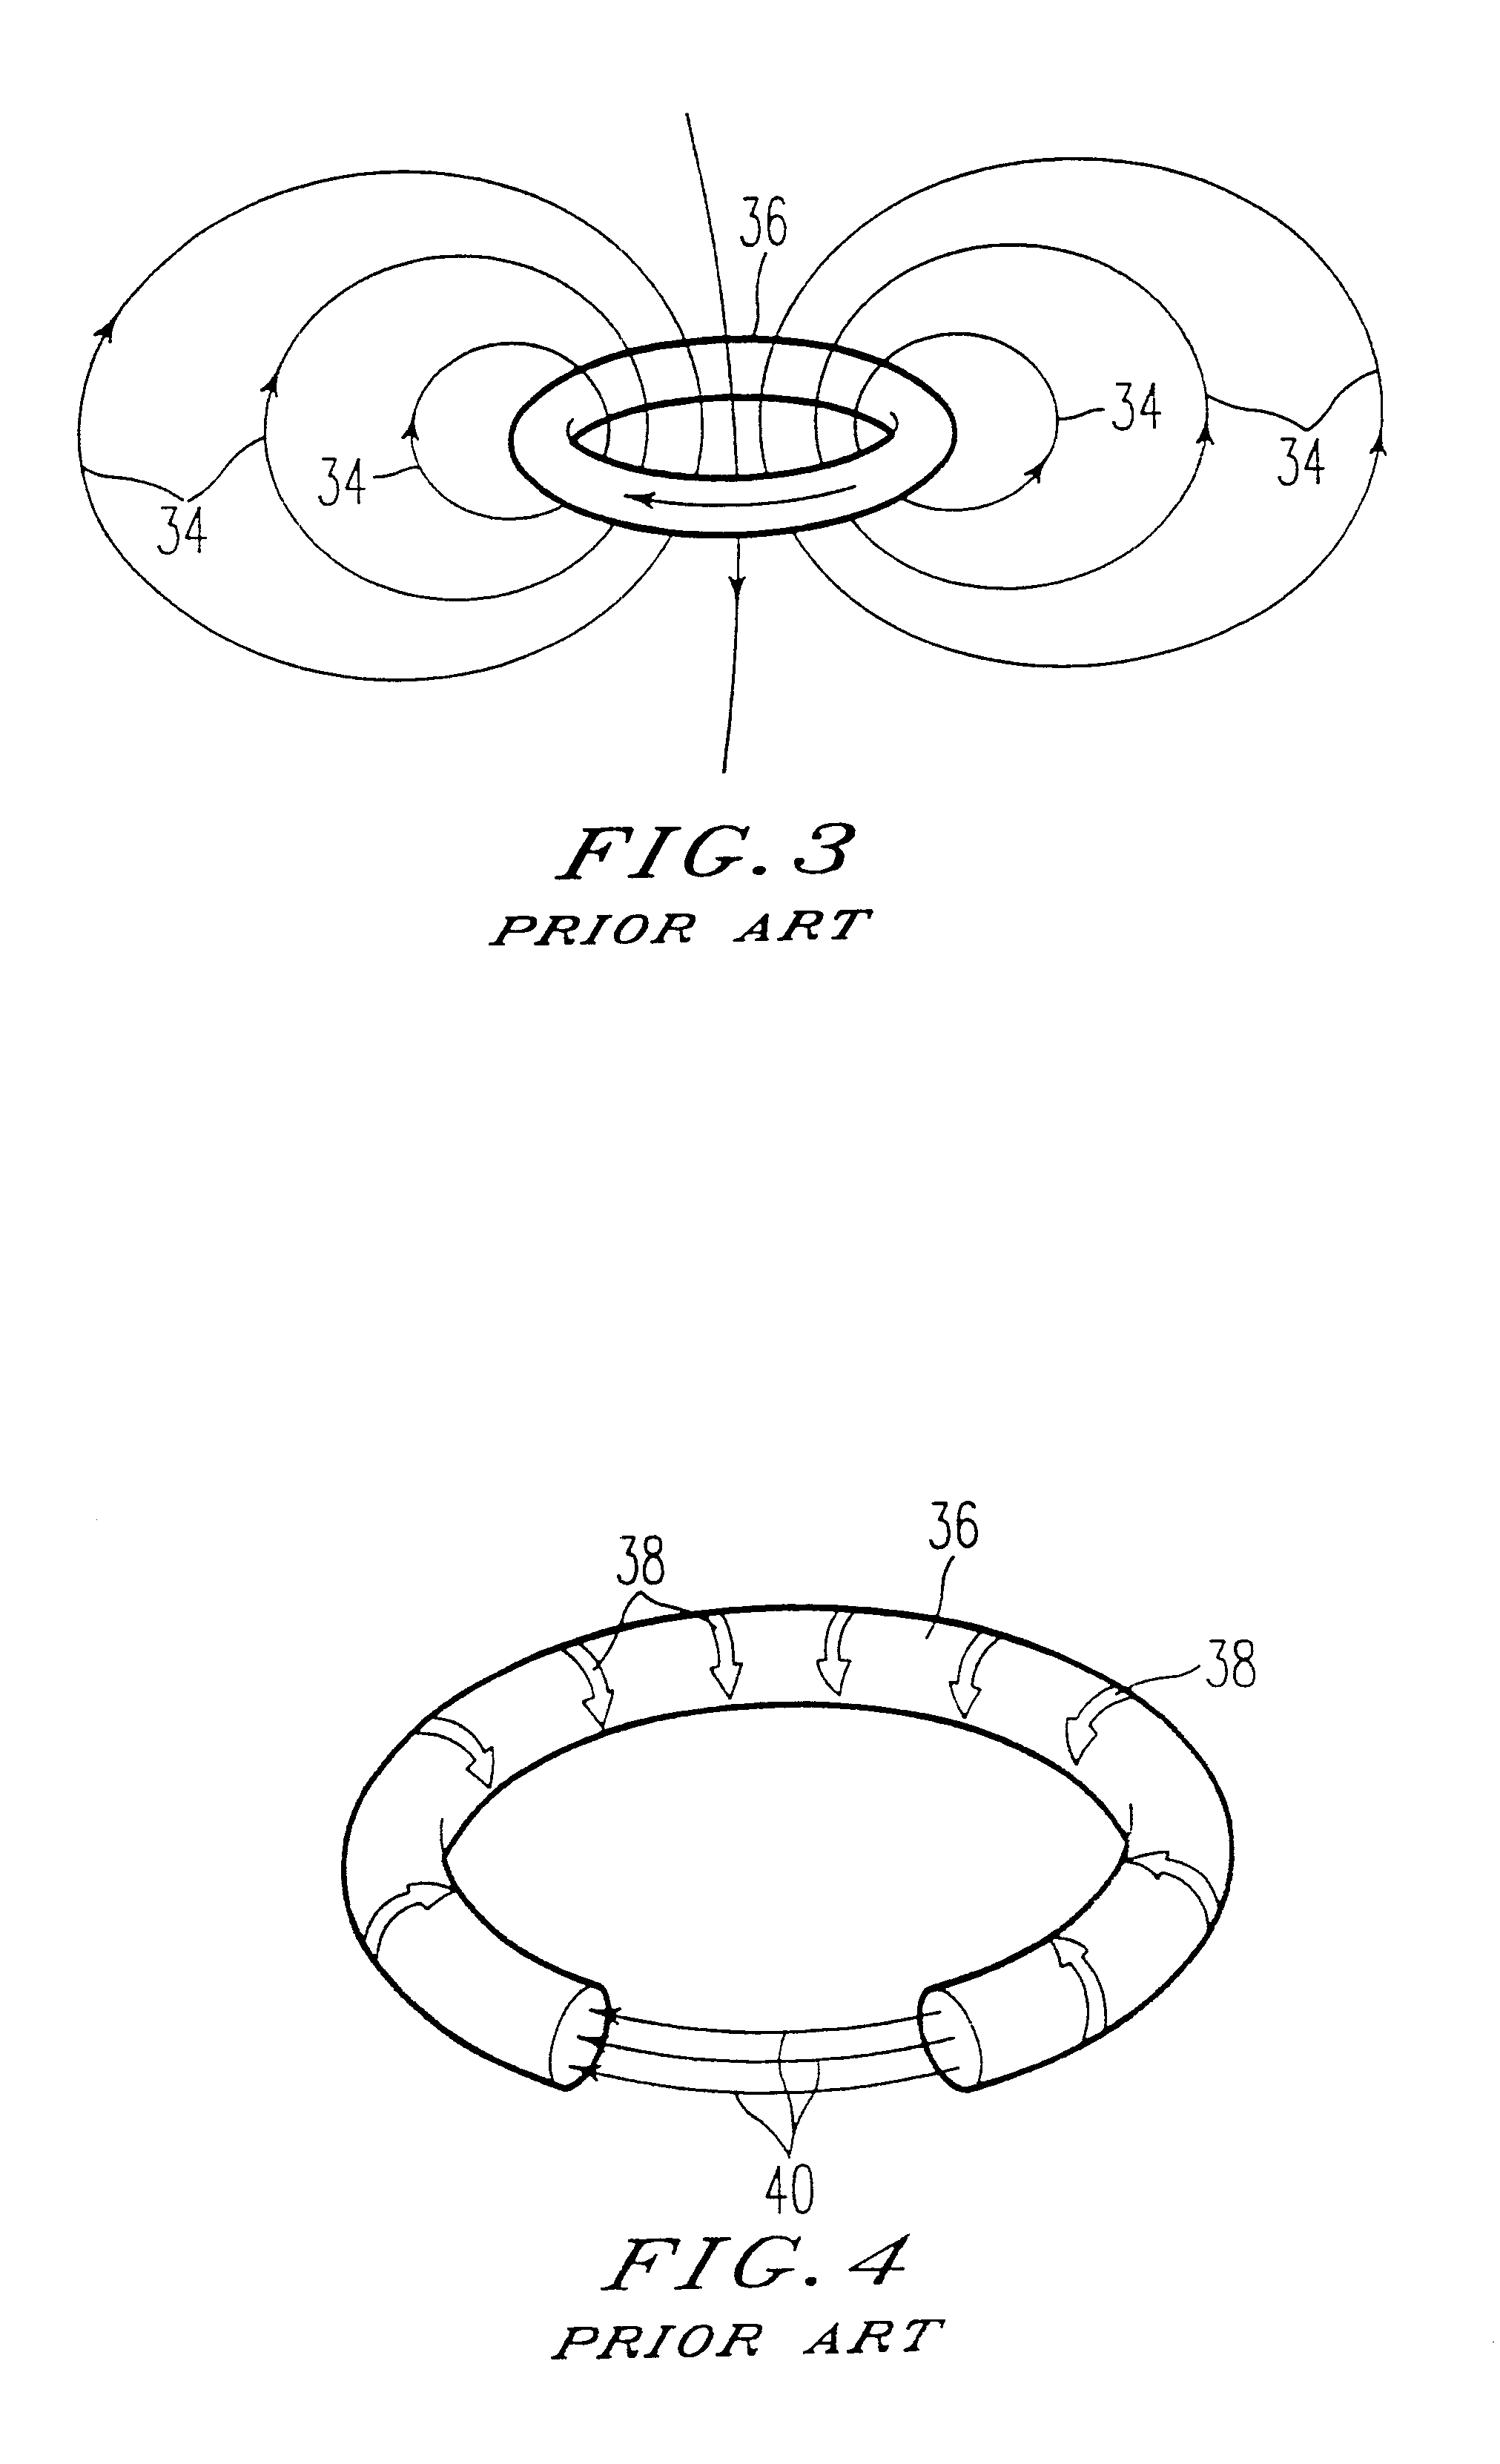 Apparatus for generating a compound plasma configuration with multiple helical conductor elements